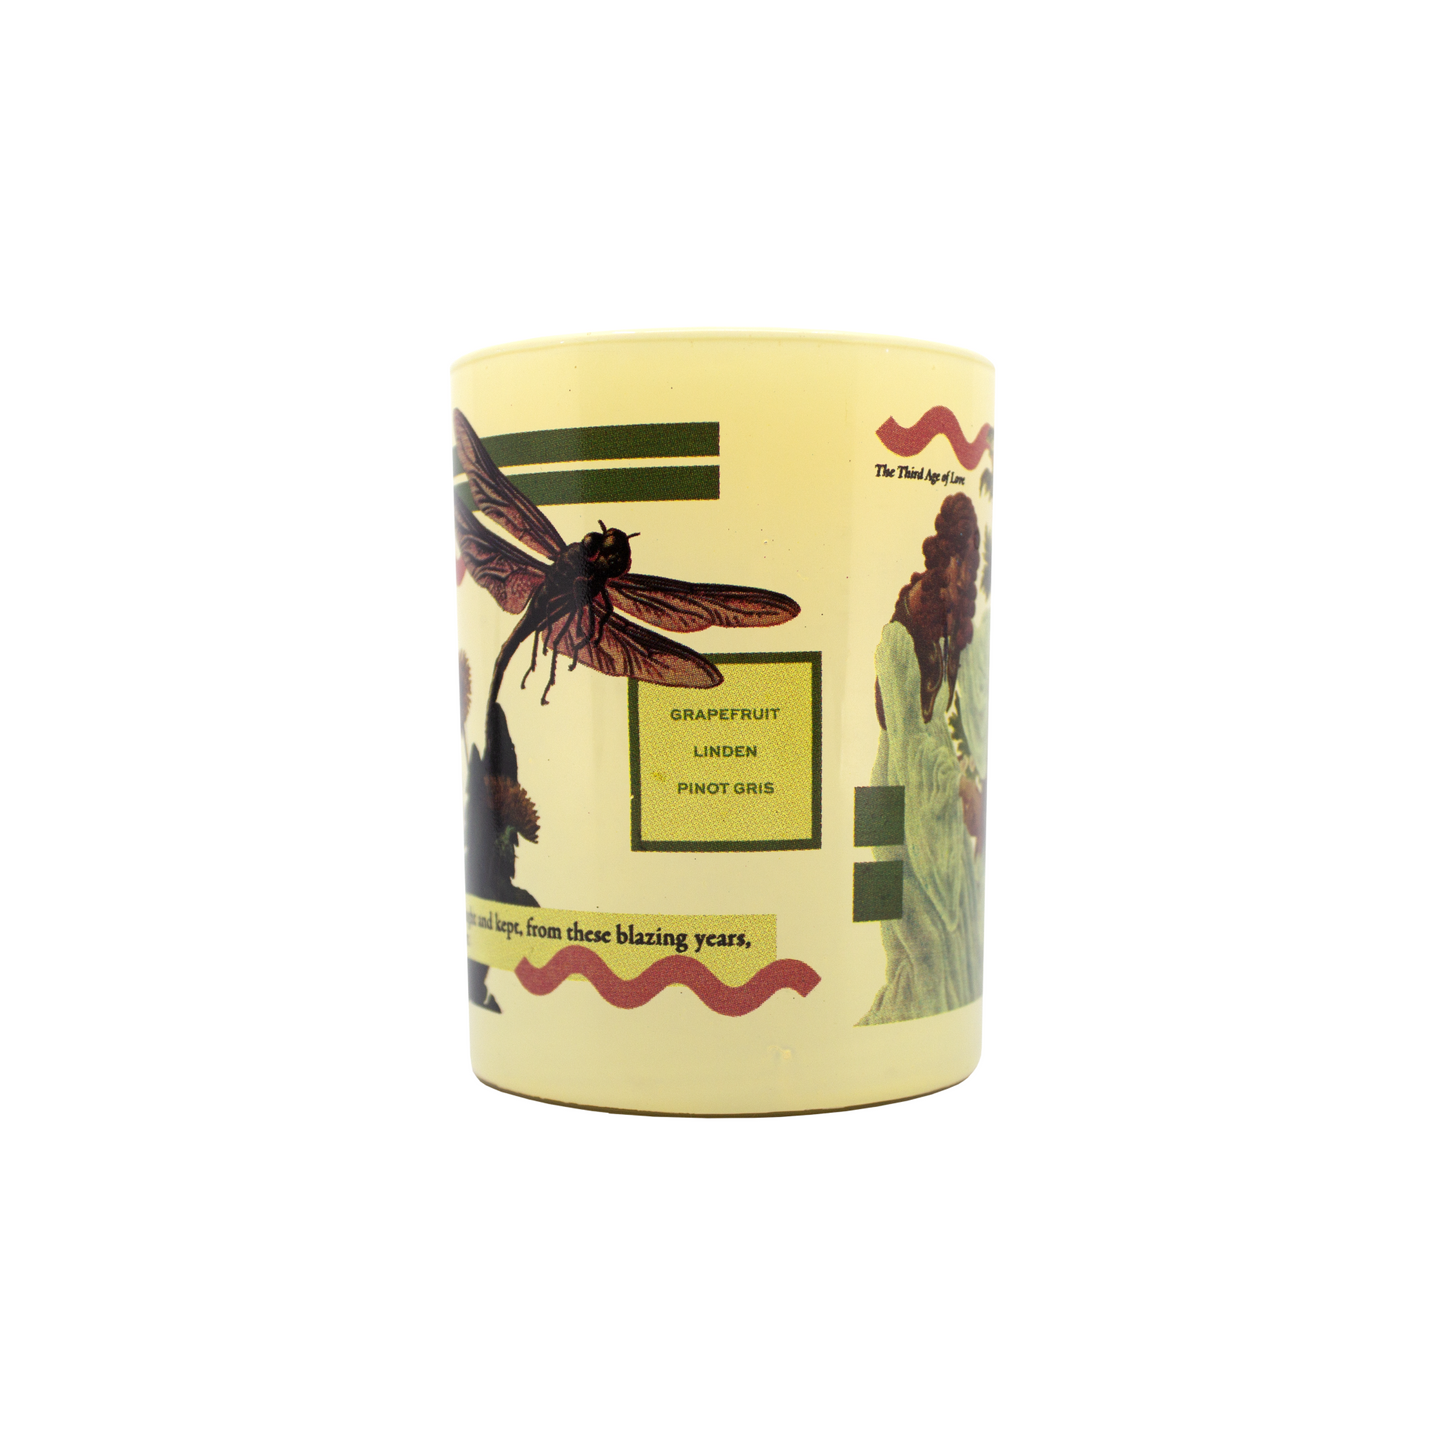 Meet Me in the Meadow Candle